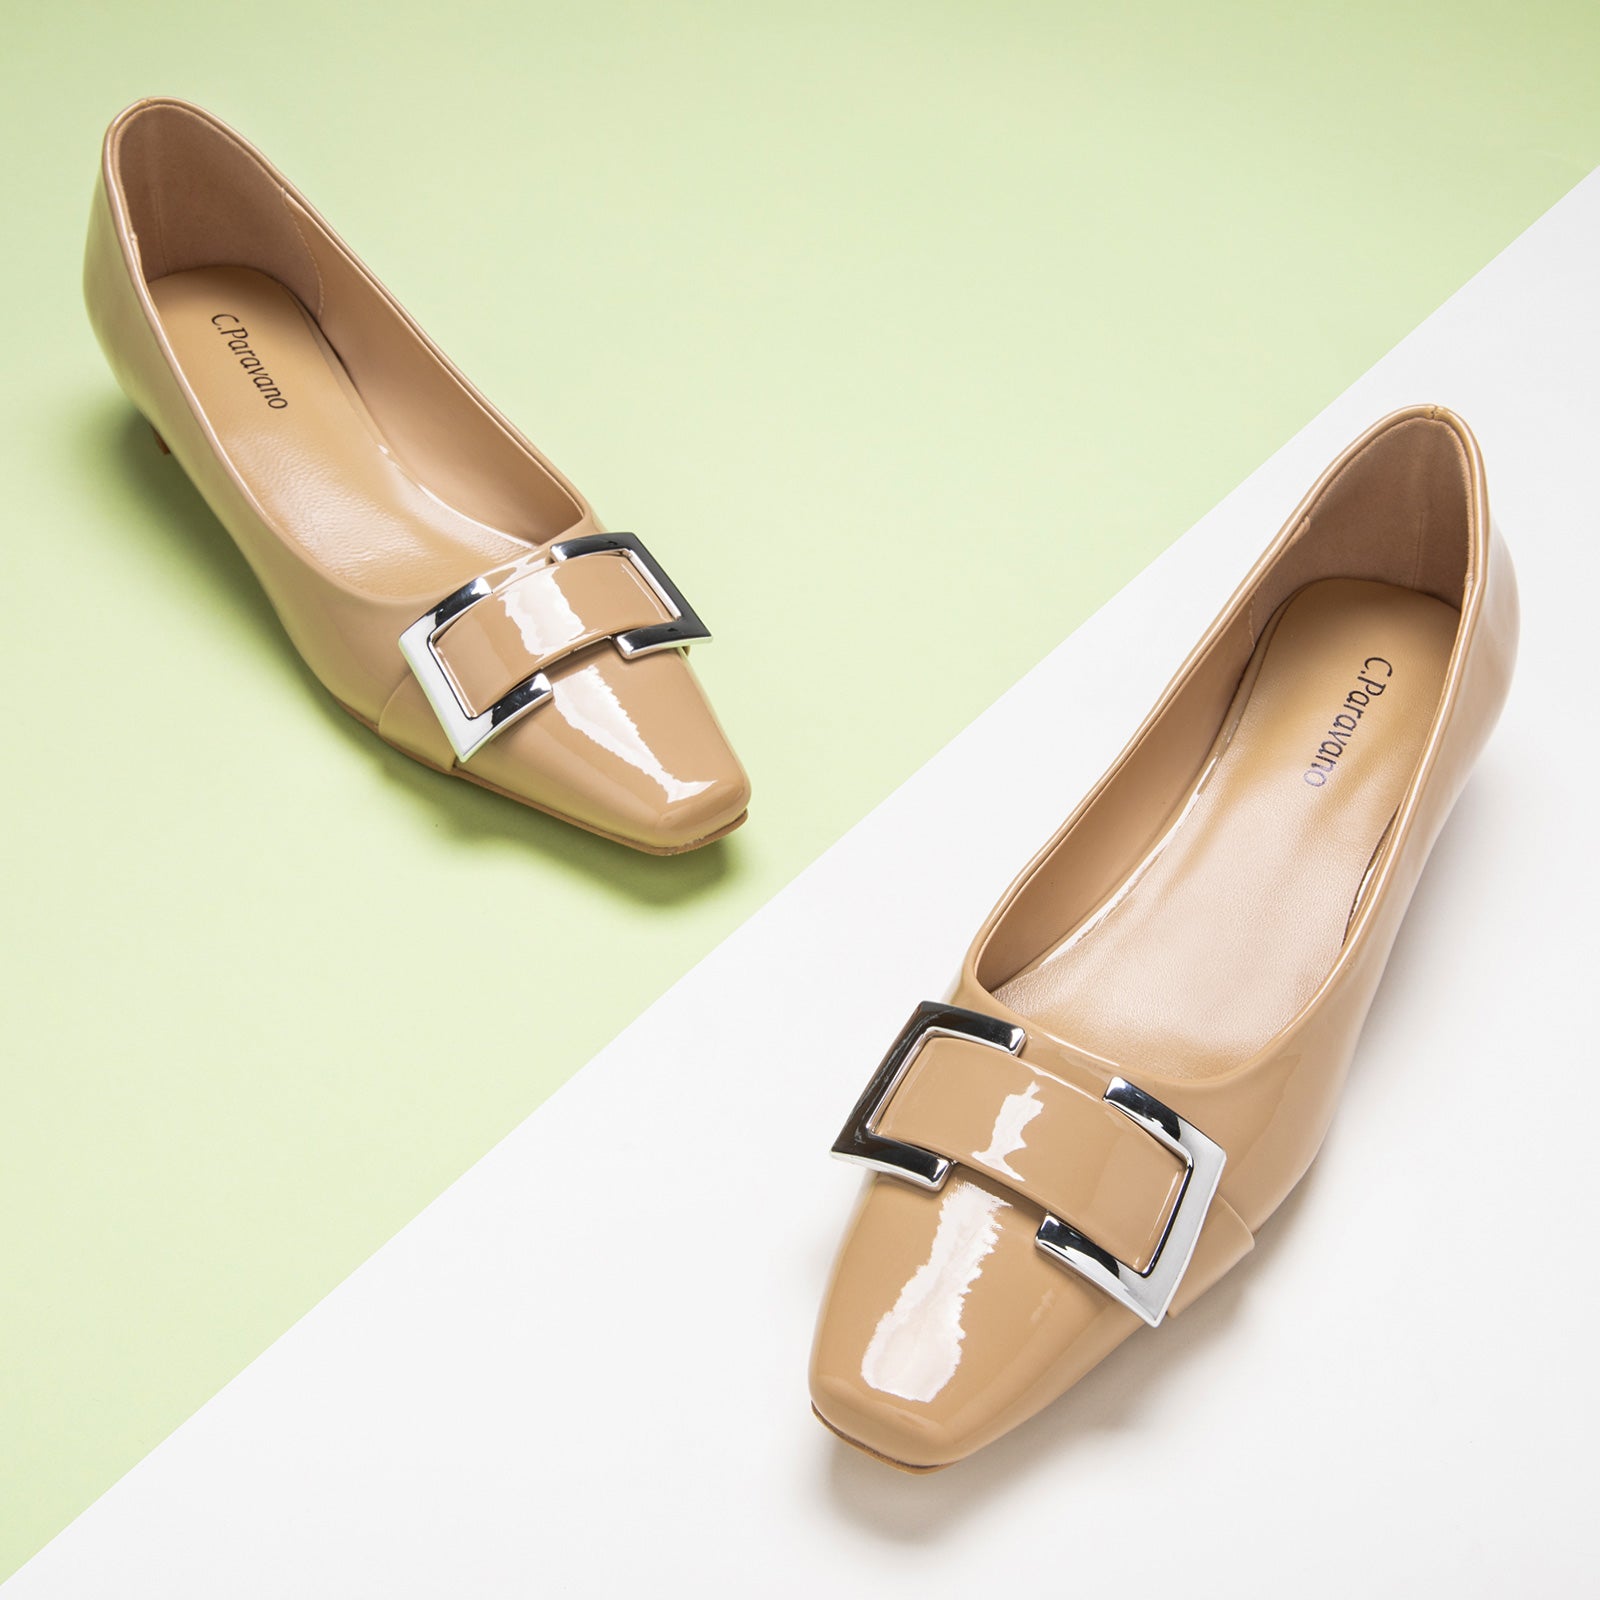 Warm and Welcoming: Beige Low Heels with metal accents, providing a cozy and fashionable addition to your footwear collection